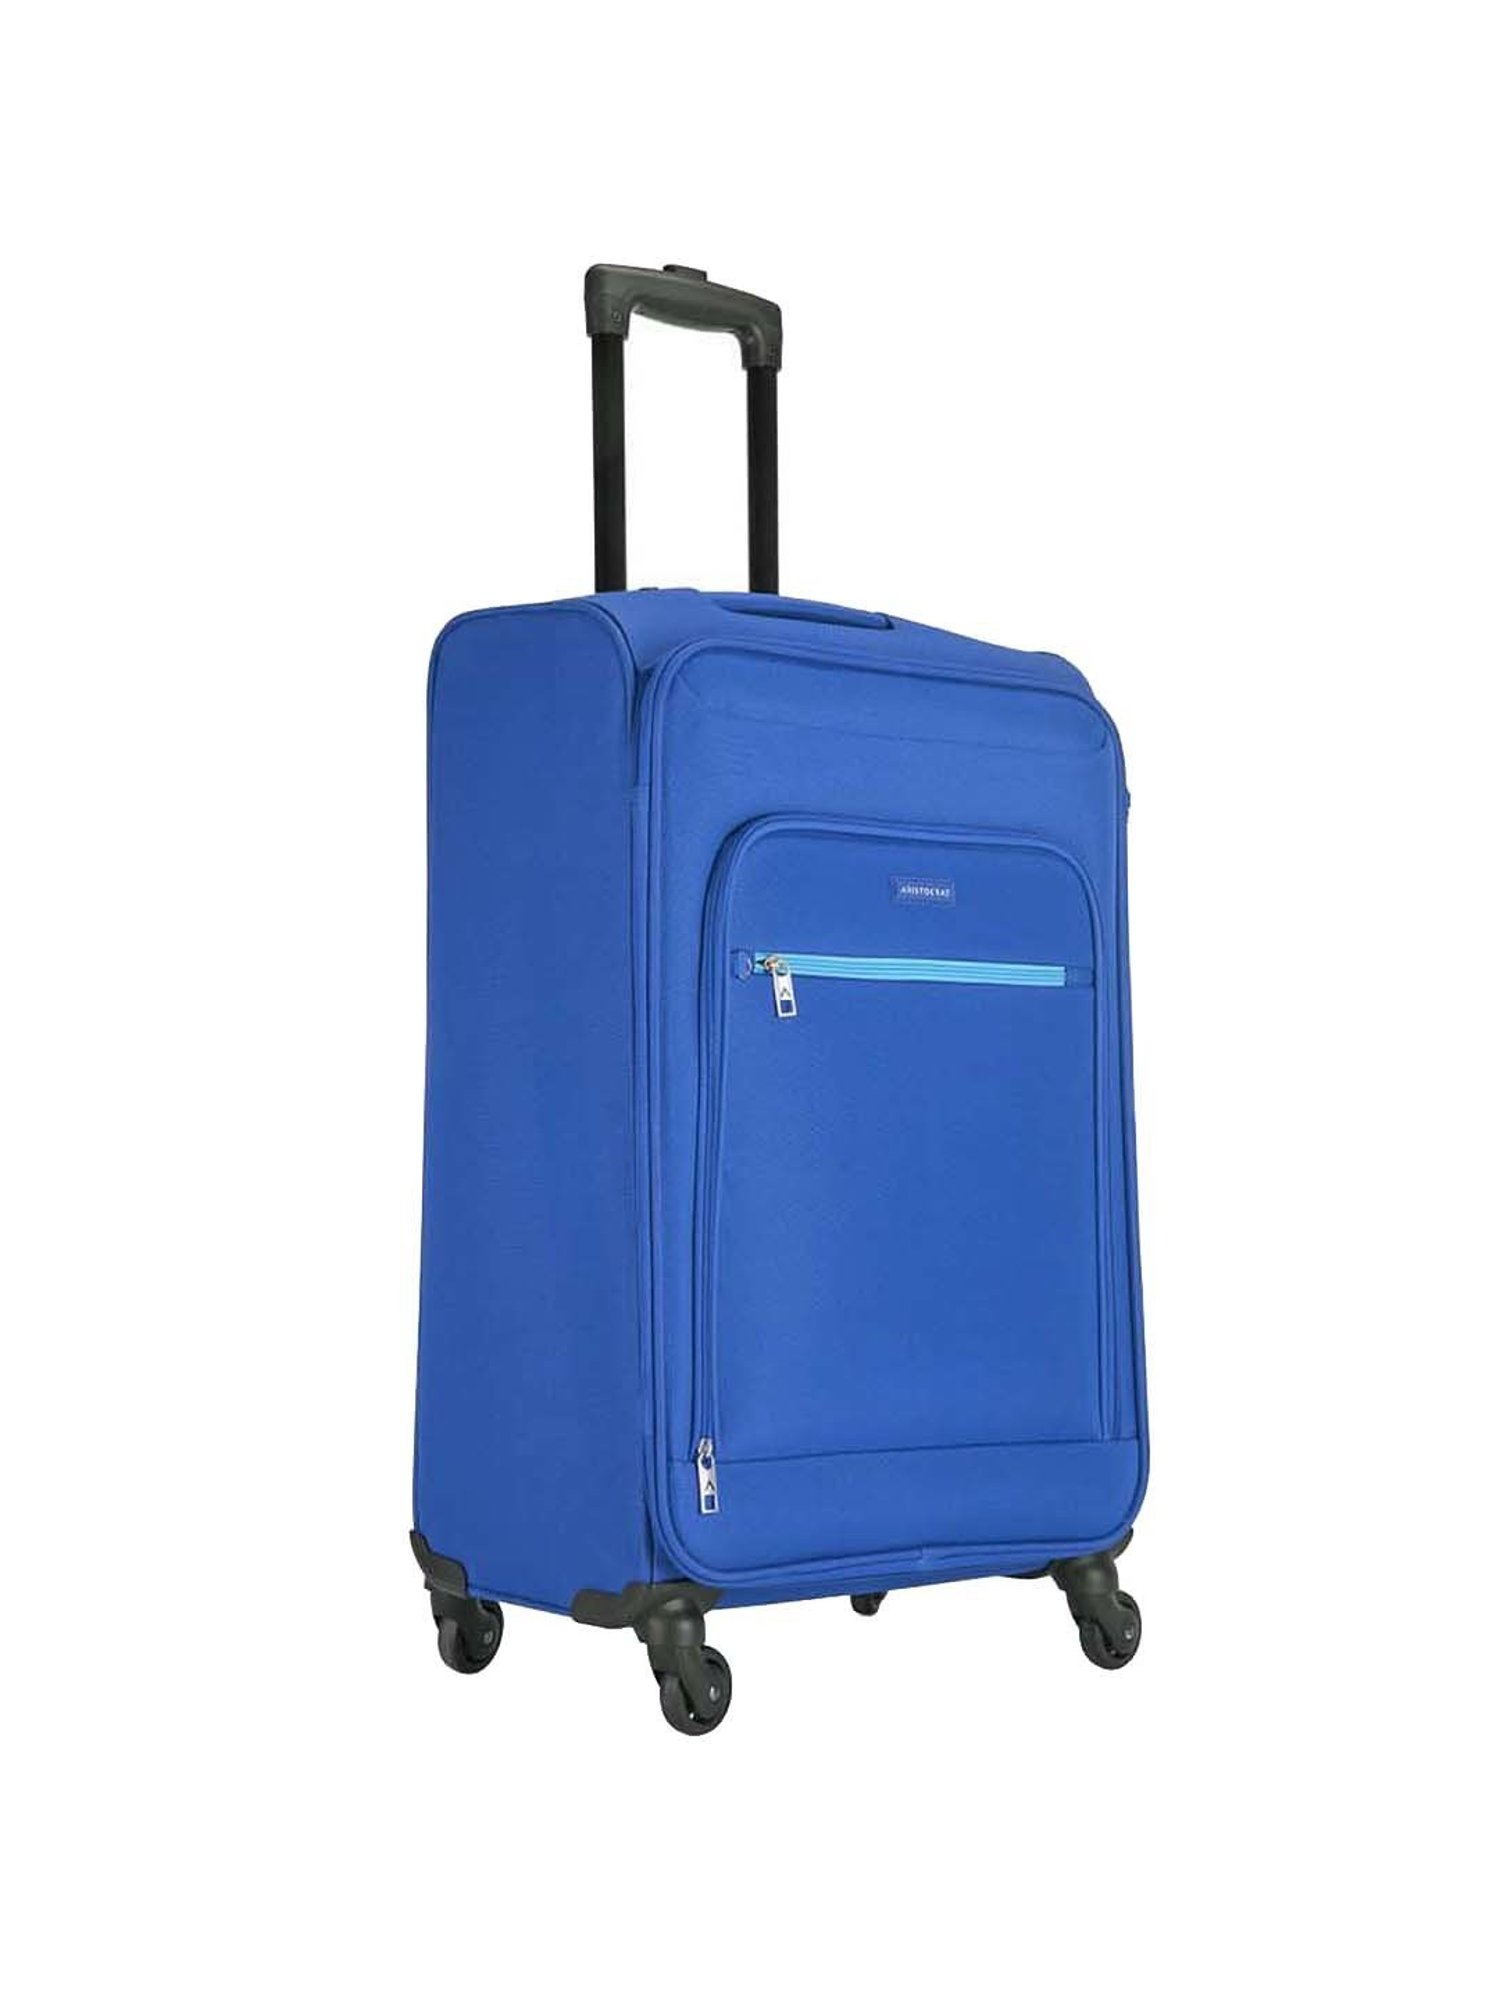 Best Aristocrat Trolley Bags: Pocket-Friendly Luggage For The Peace Of Mind